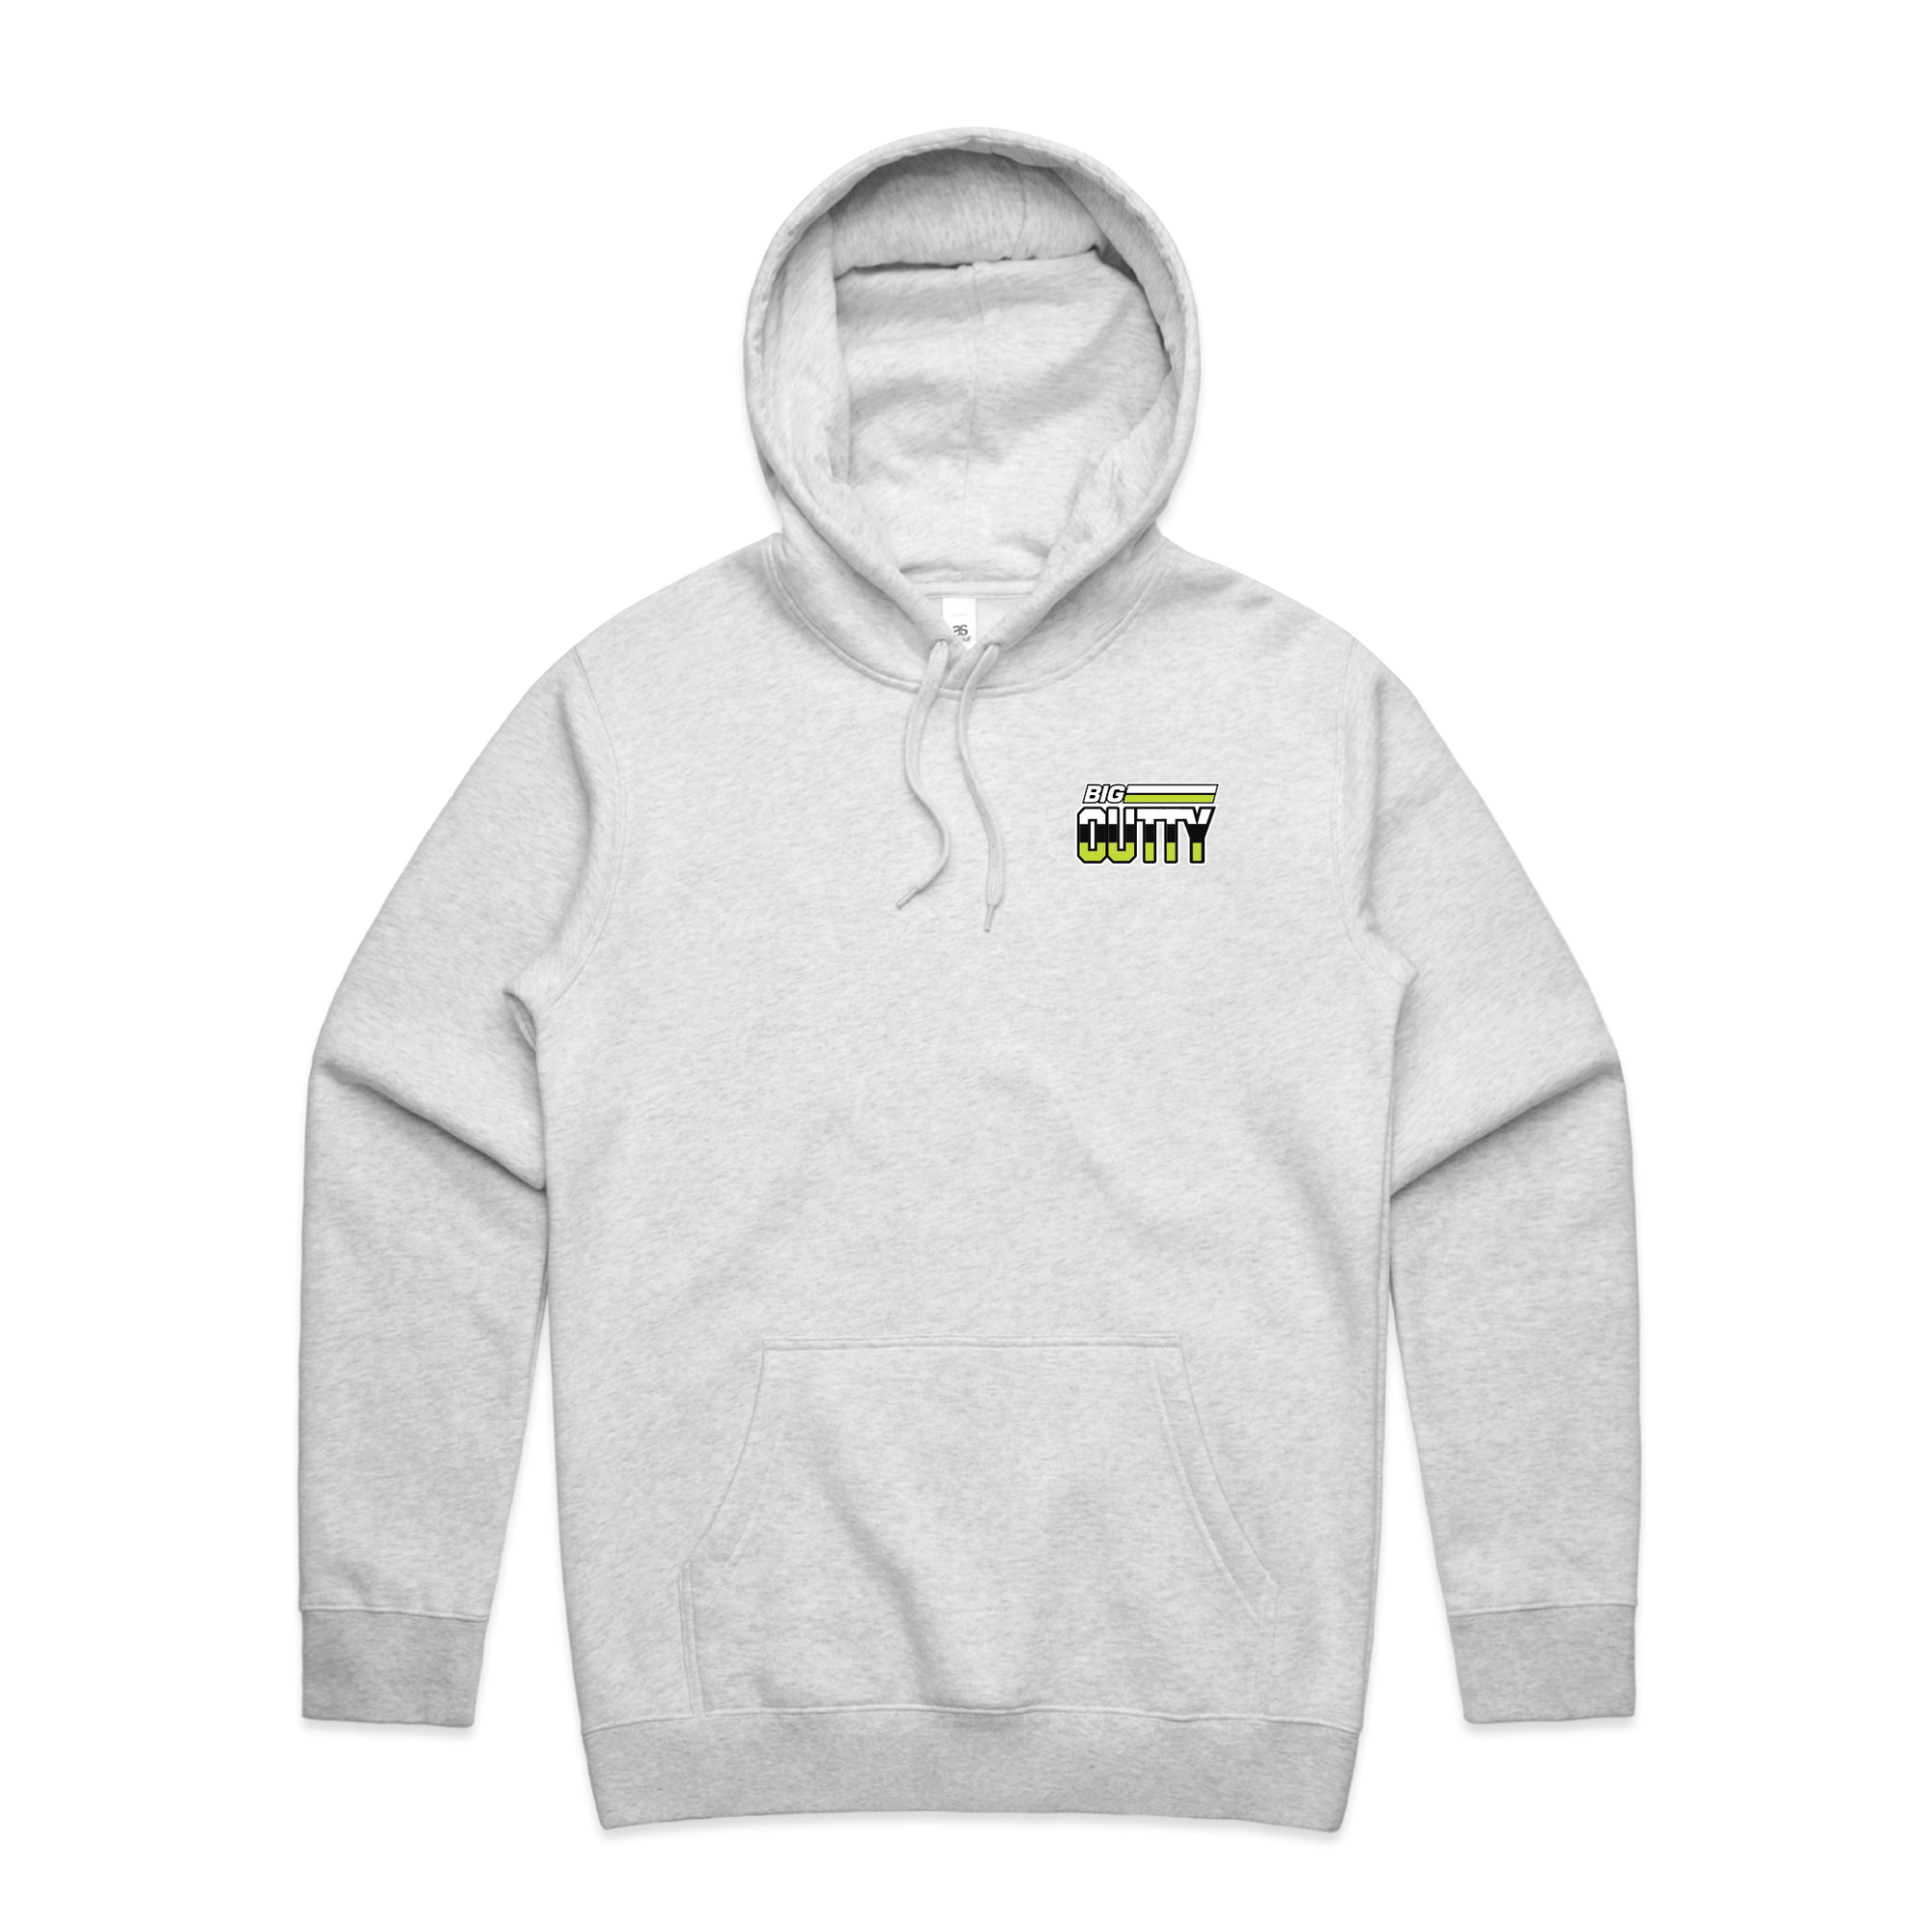 Big Outty Hoodie